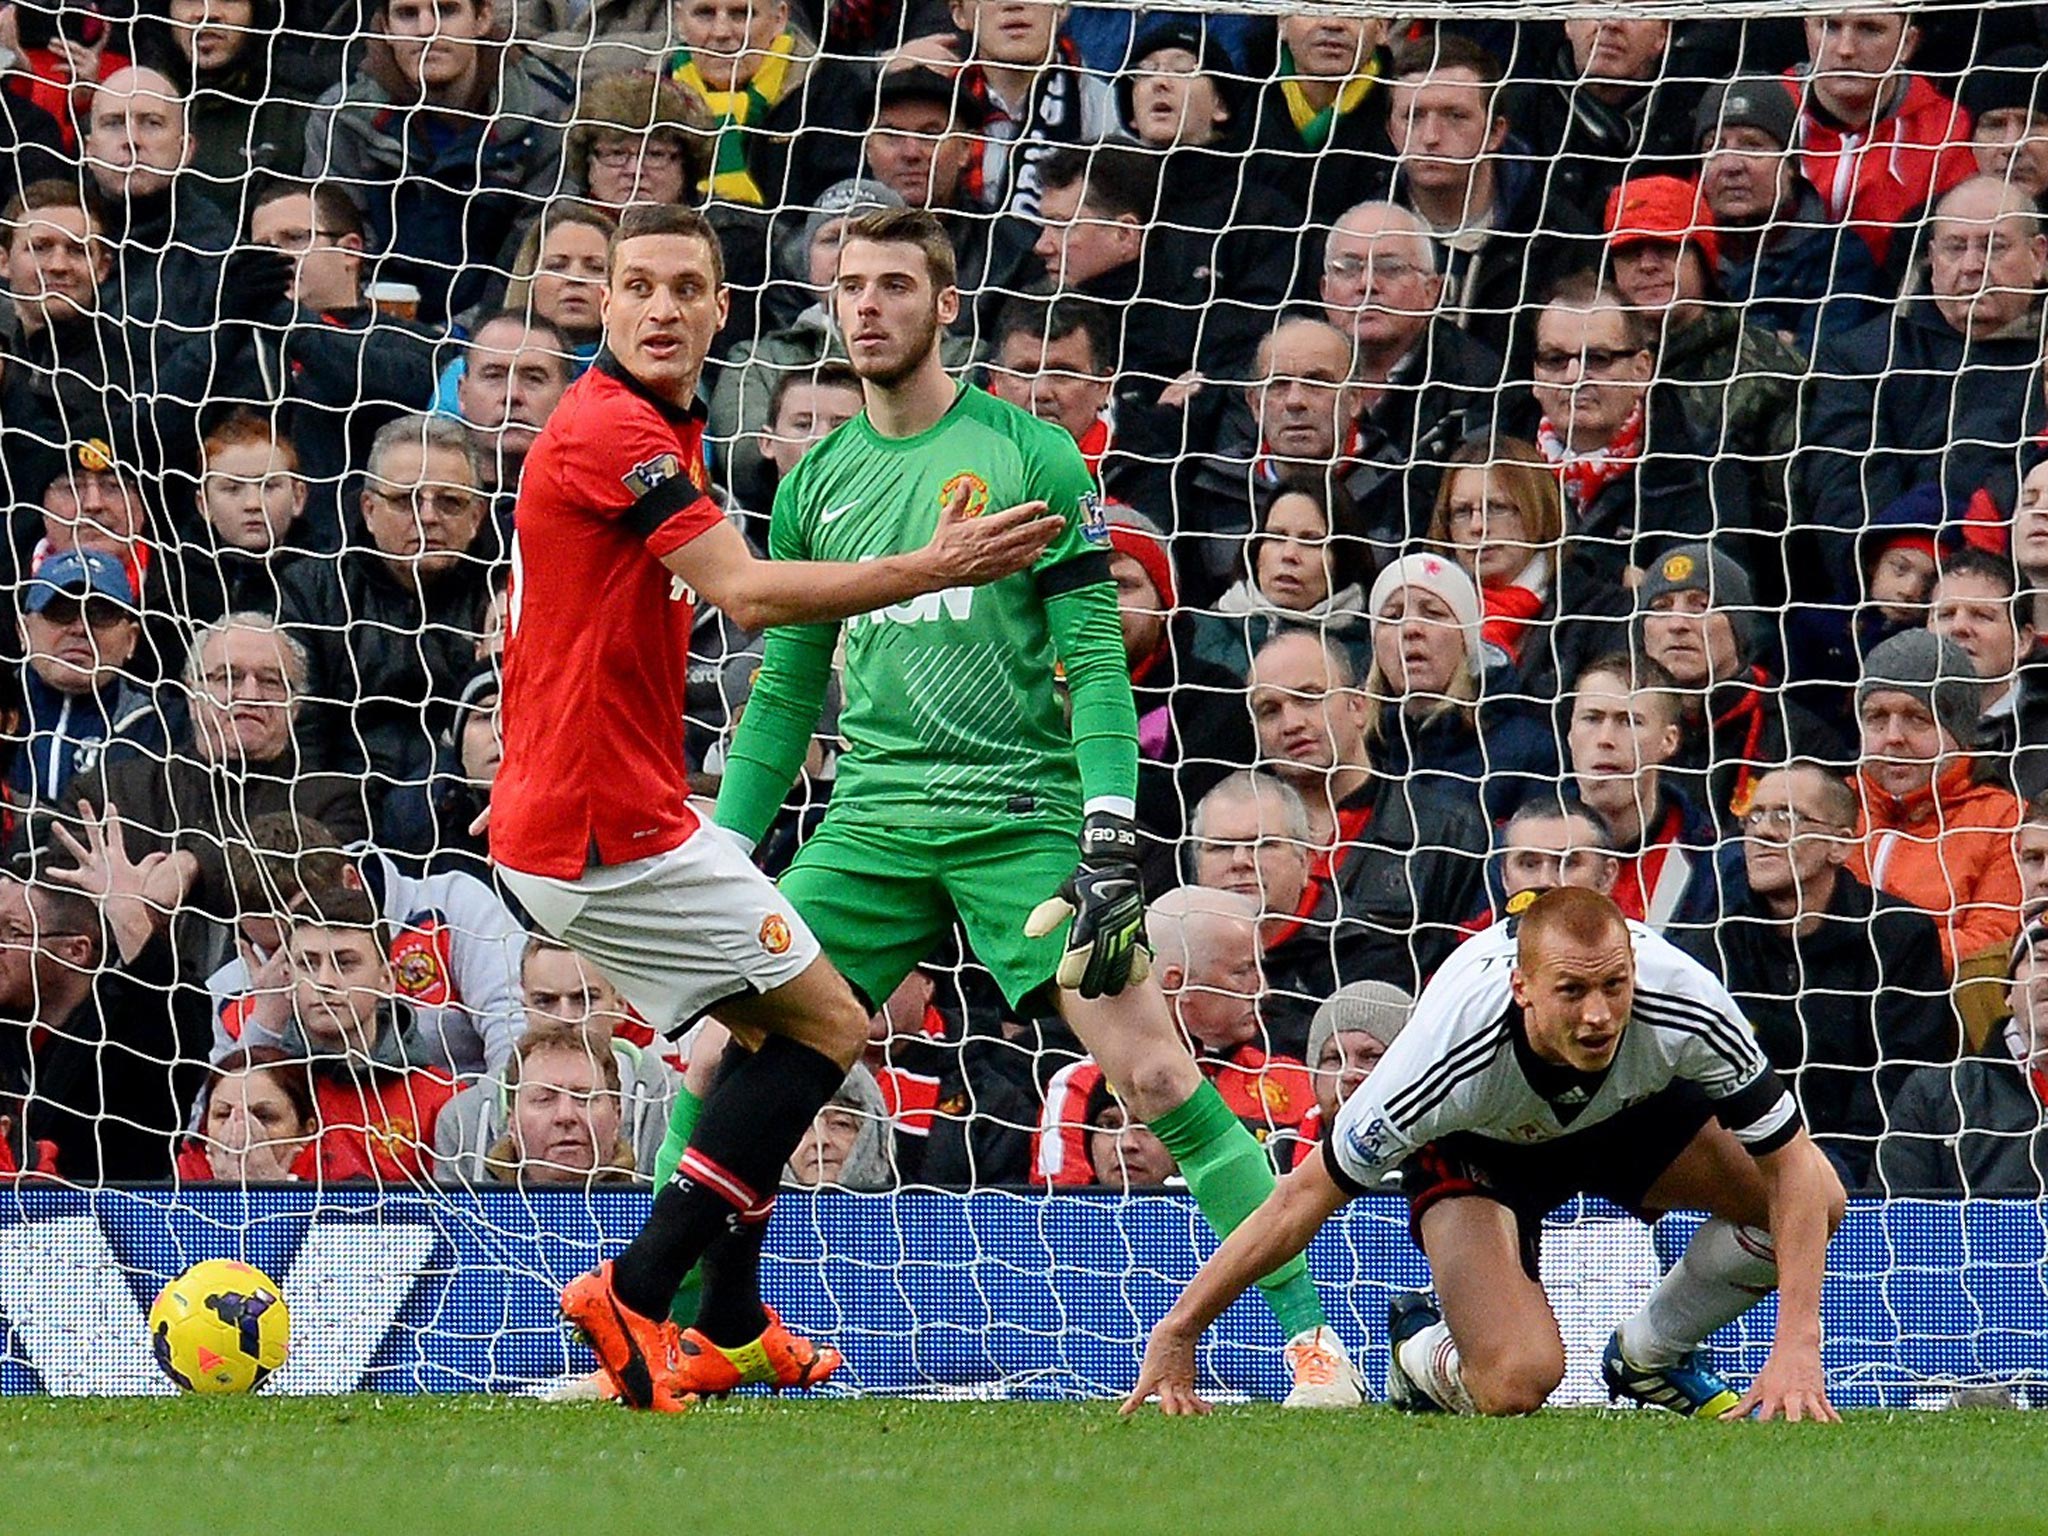 Nemanja Vidic and David de Gea search for answers after United’s
latest setback